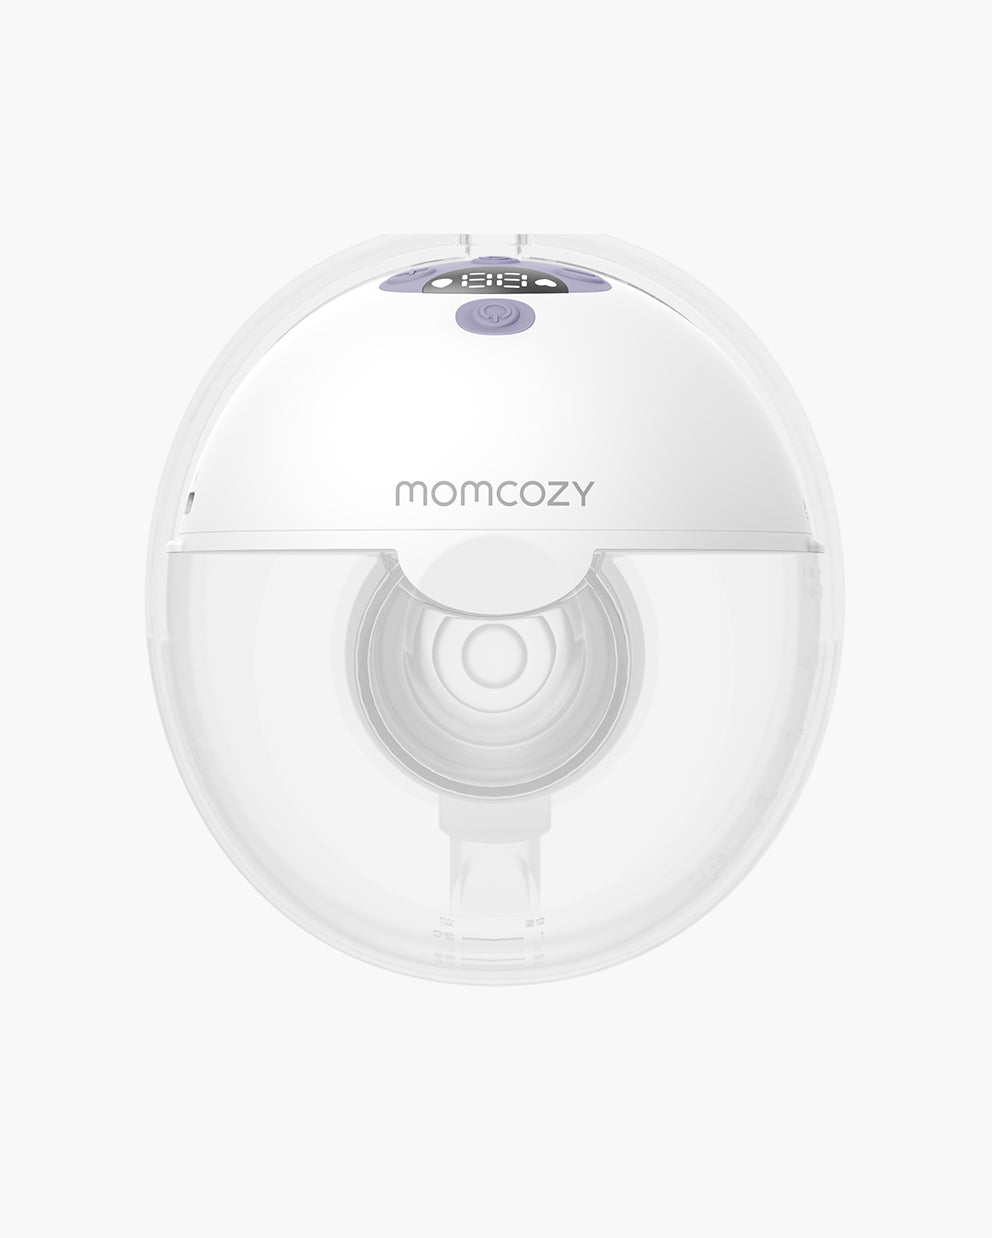 MOMCOZY M5 WEARABLE BREAST PUMP HONEST REVIEW